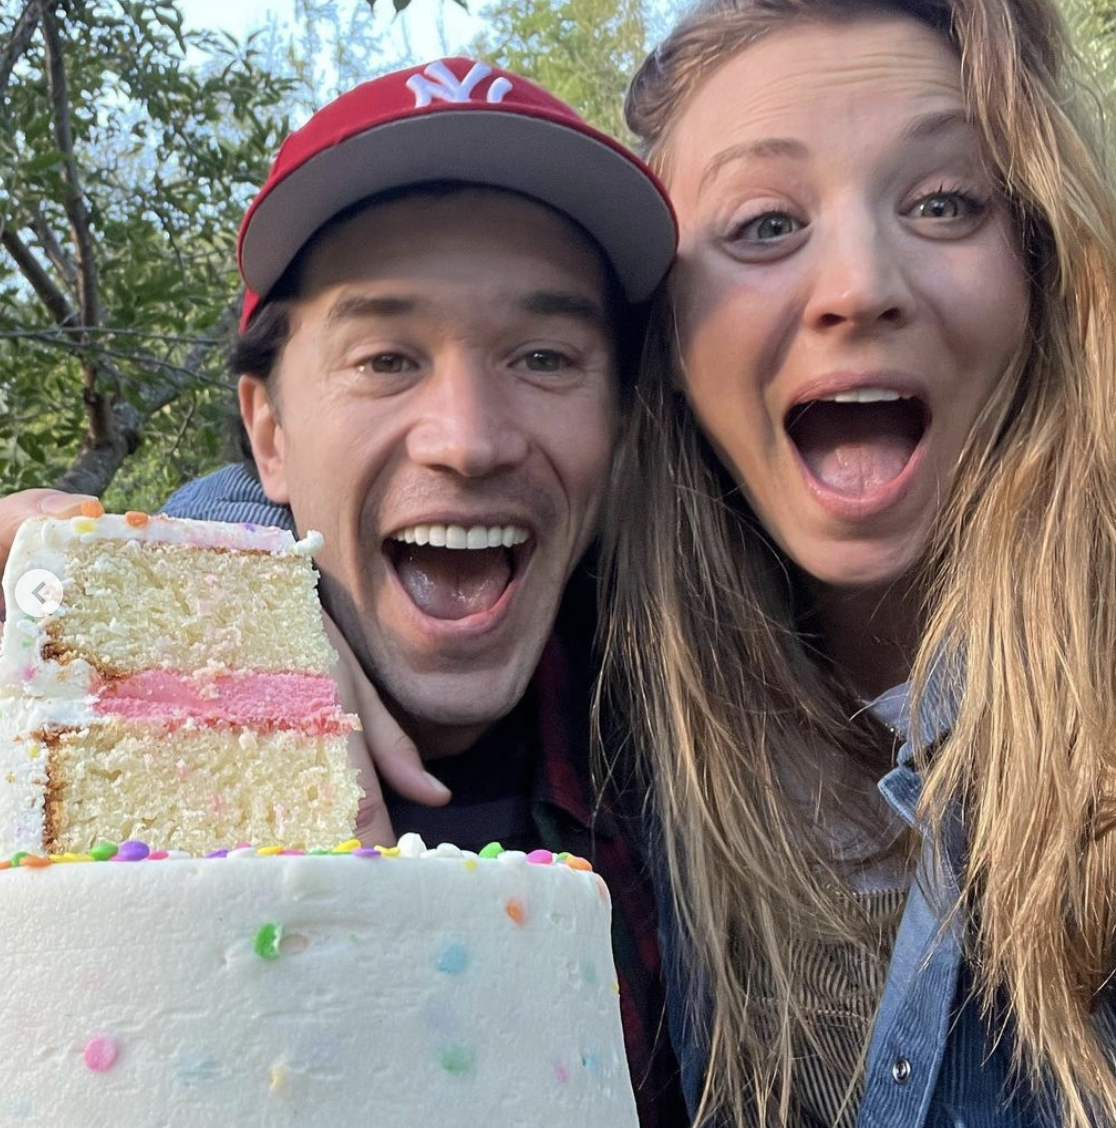 Tom and Kaley with a cake that has pink icing on the inside